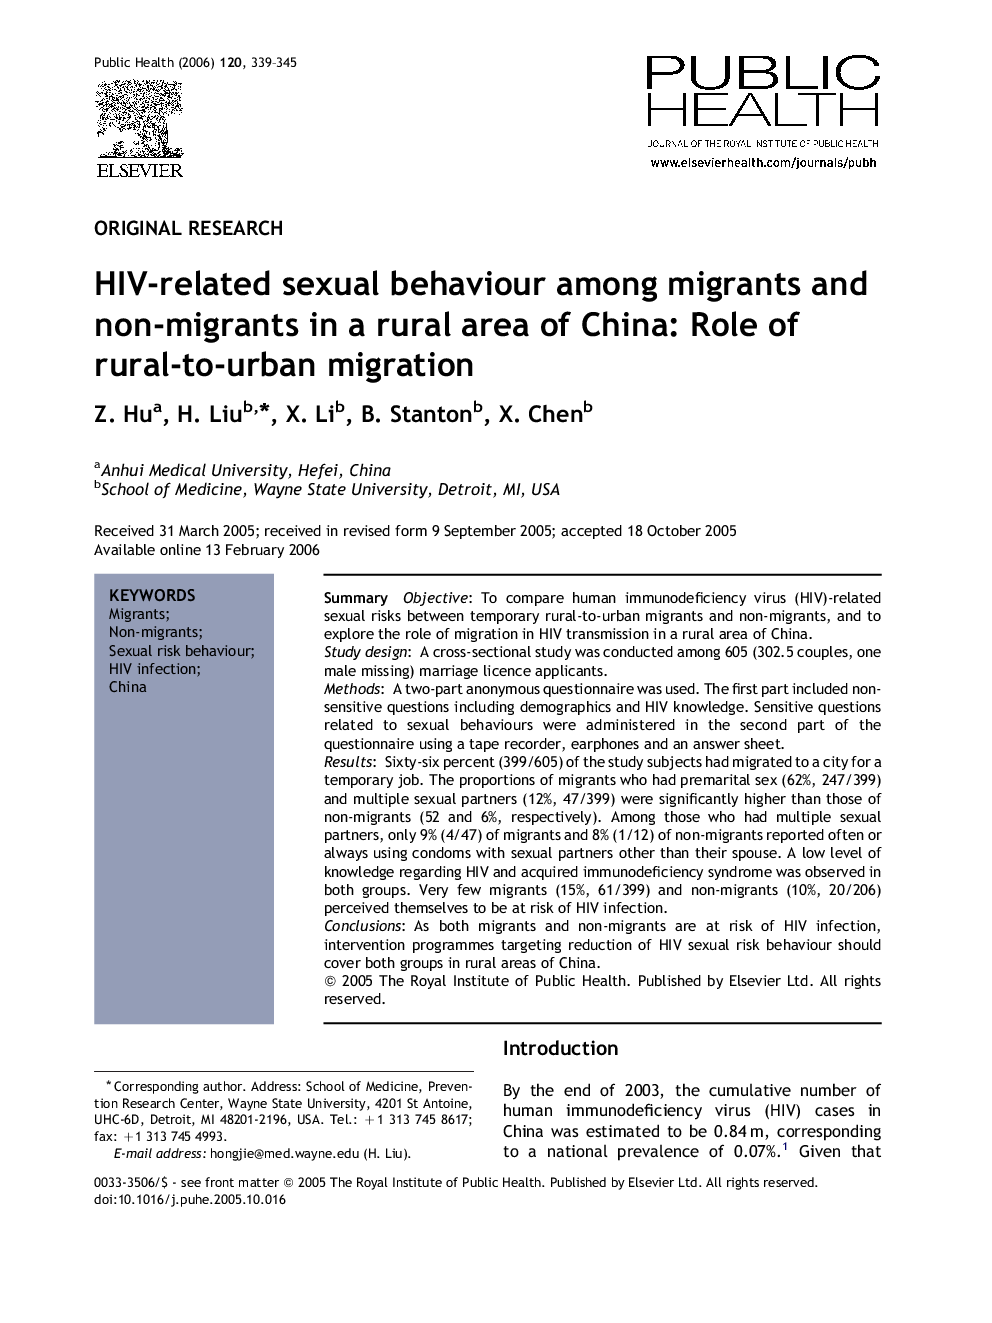 HIV-related sexual behaviour among migrants and non-migrants in a rural area of China: Role of rural-to-urban migration